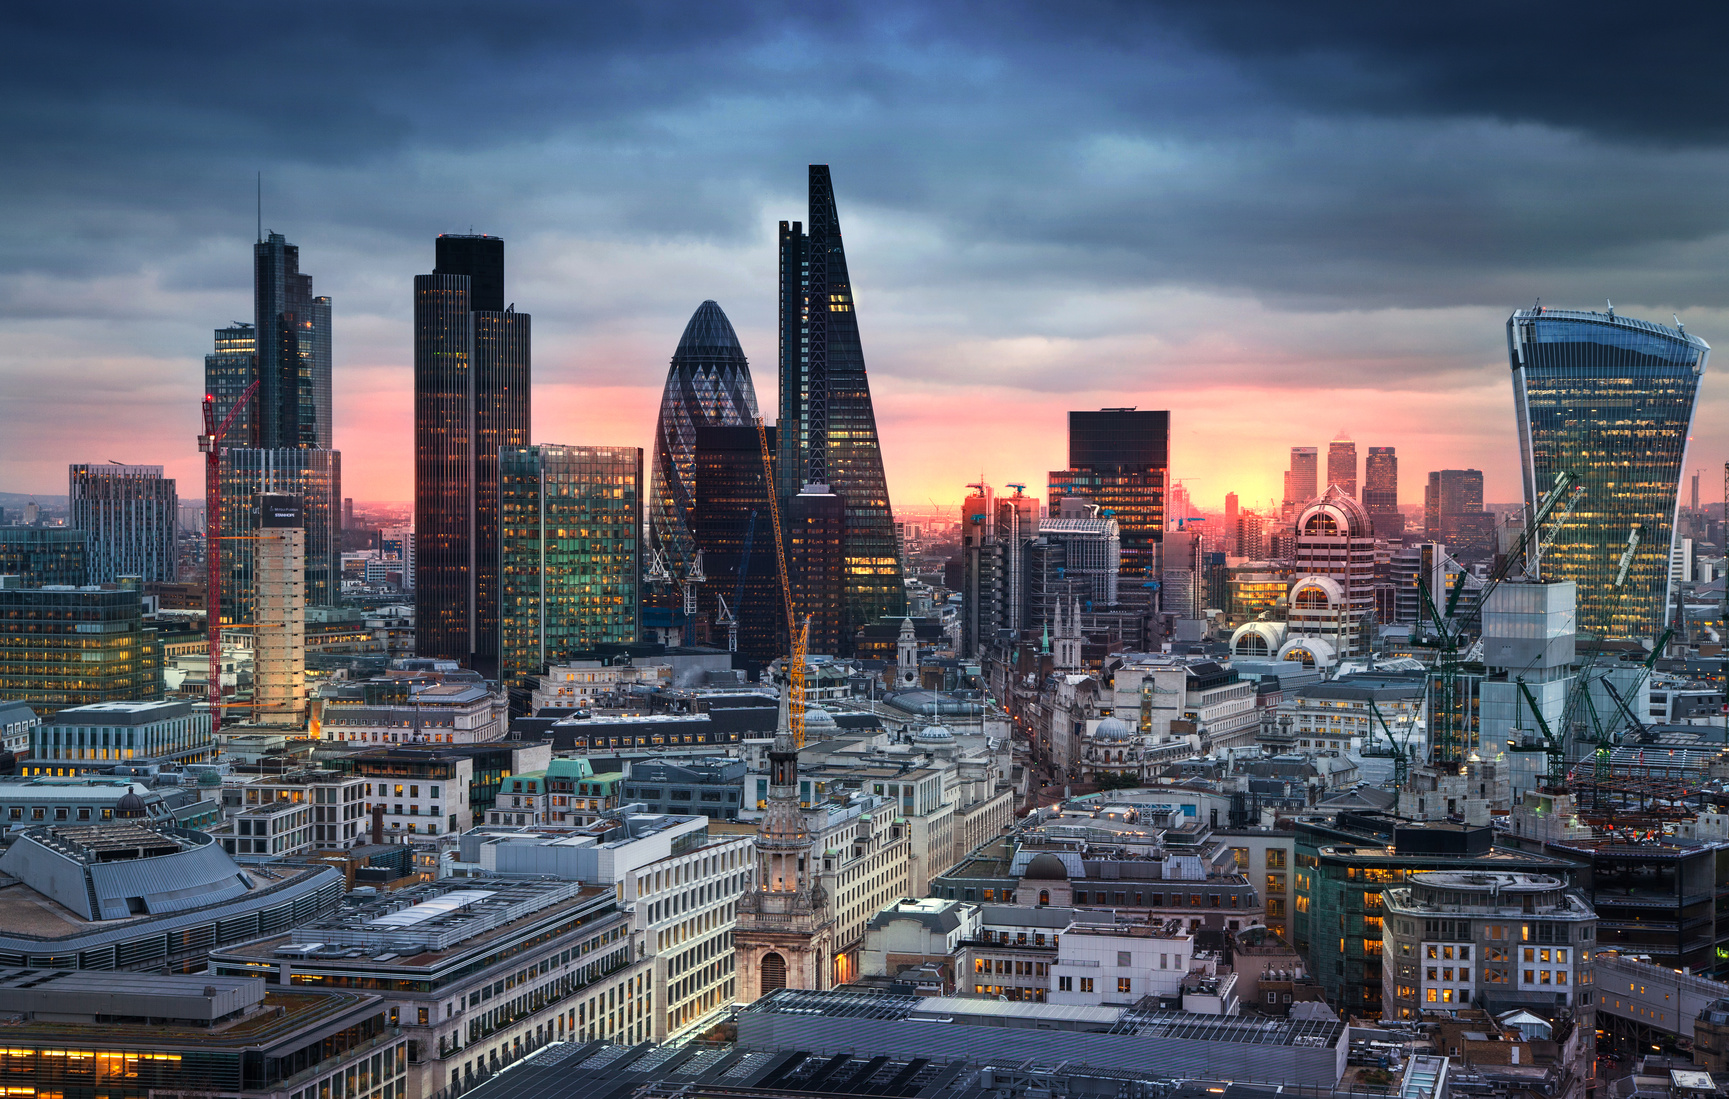 49 consecutive years of dividend increases: The City of London